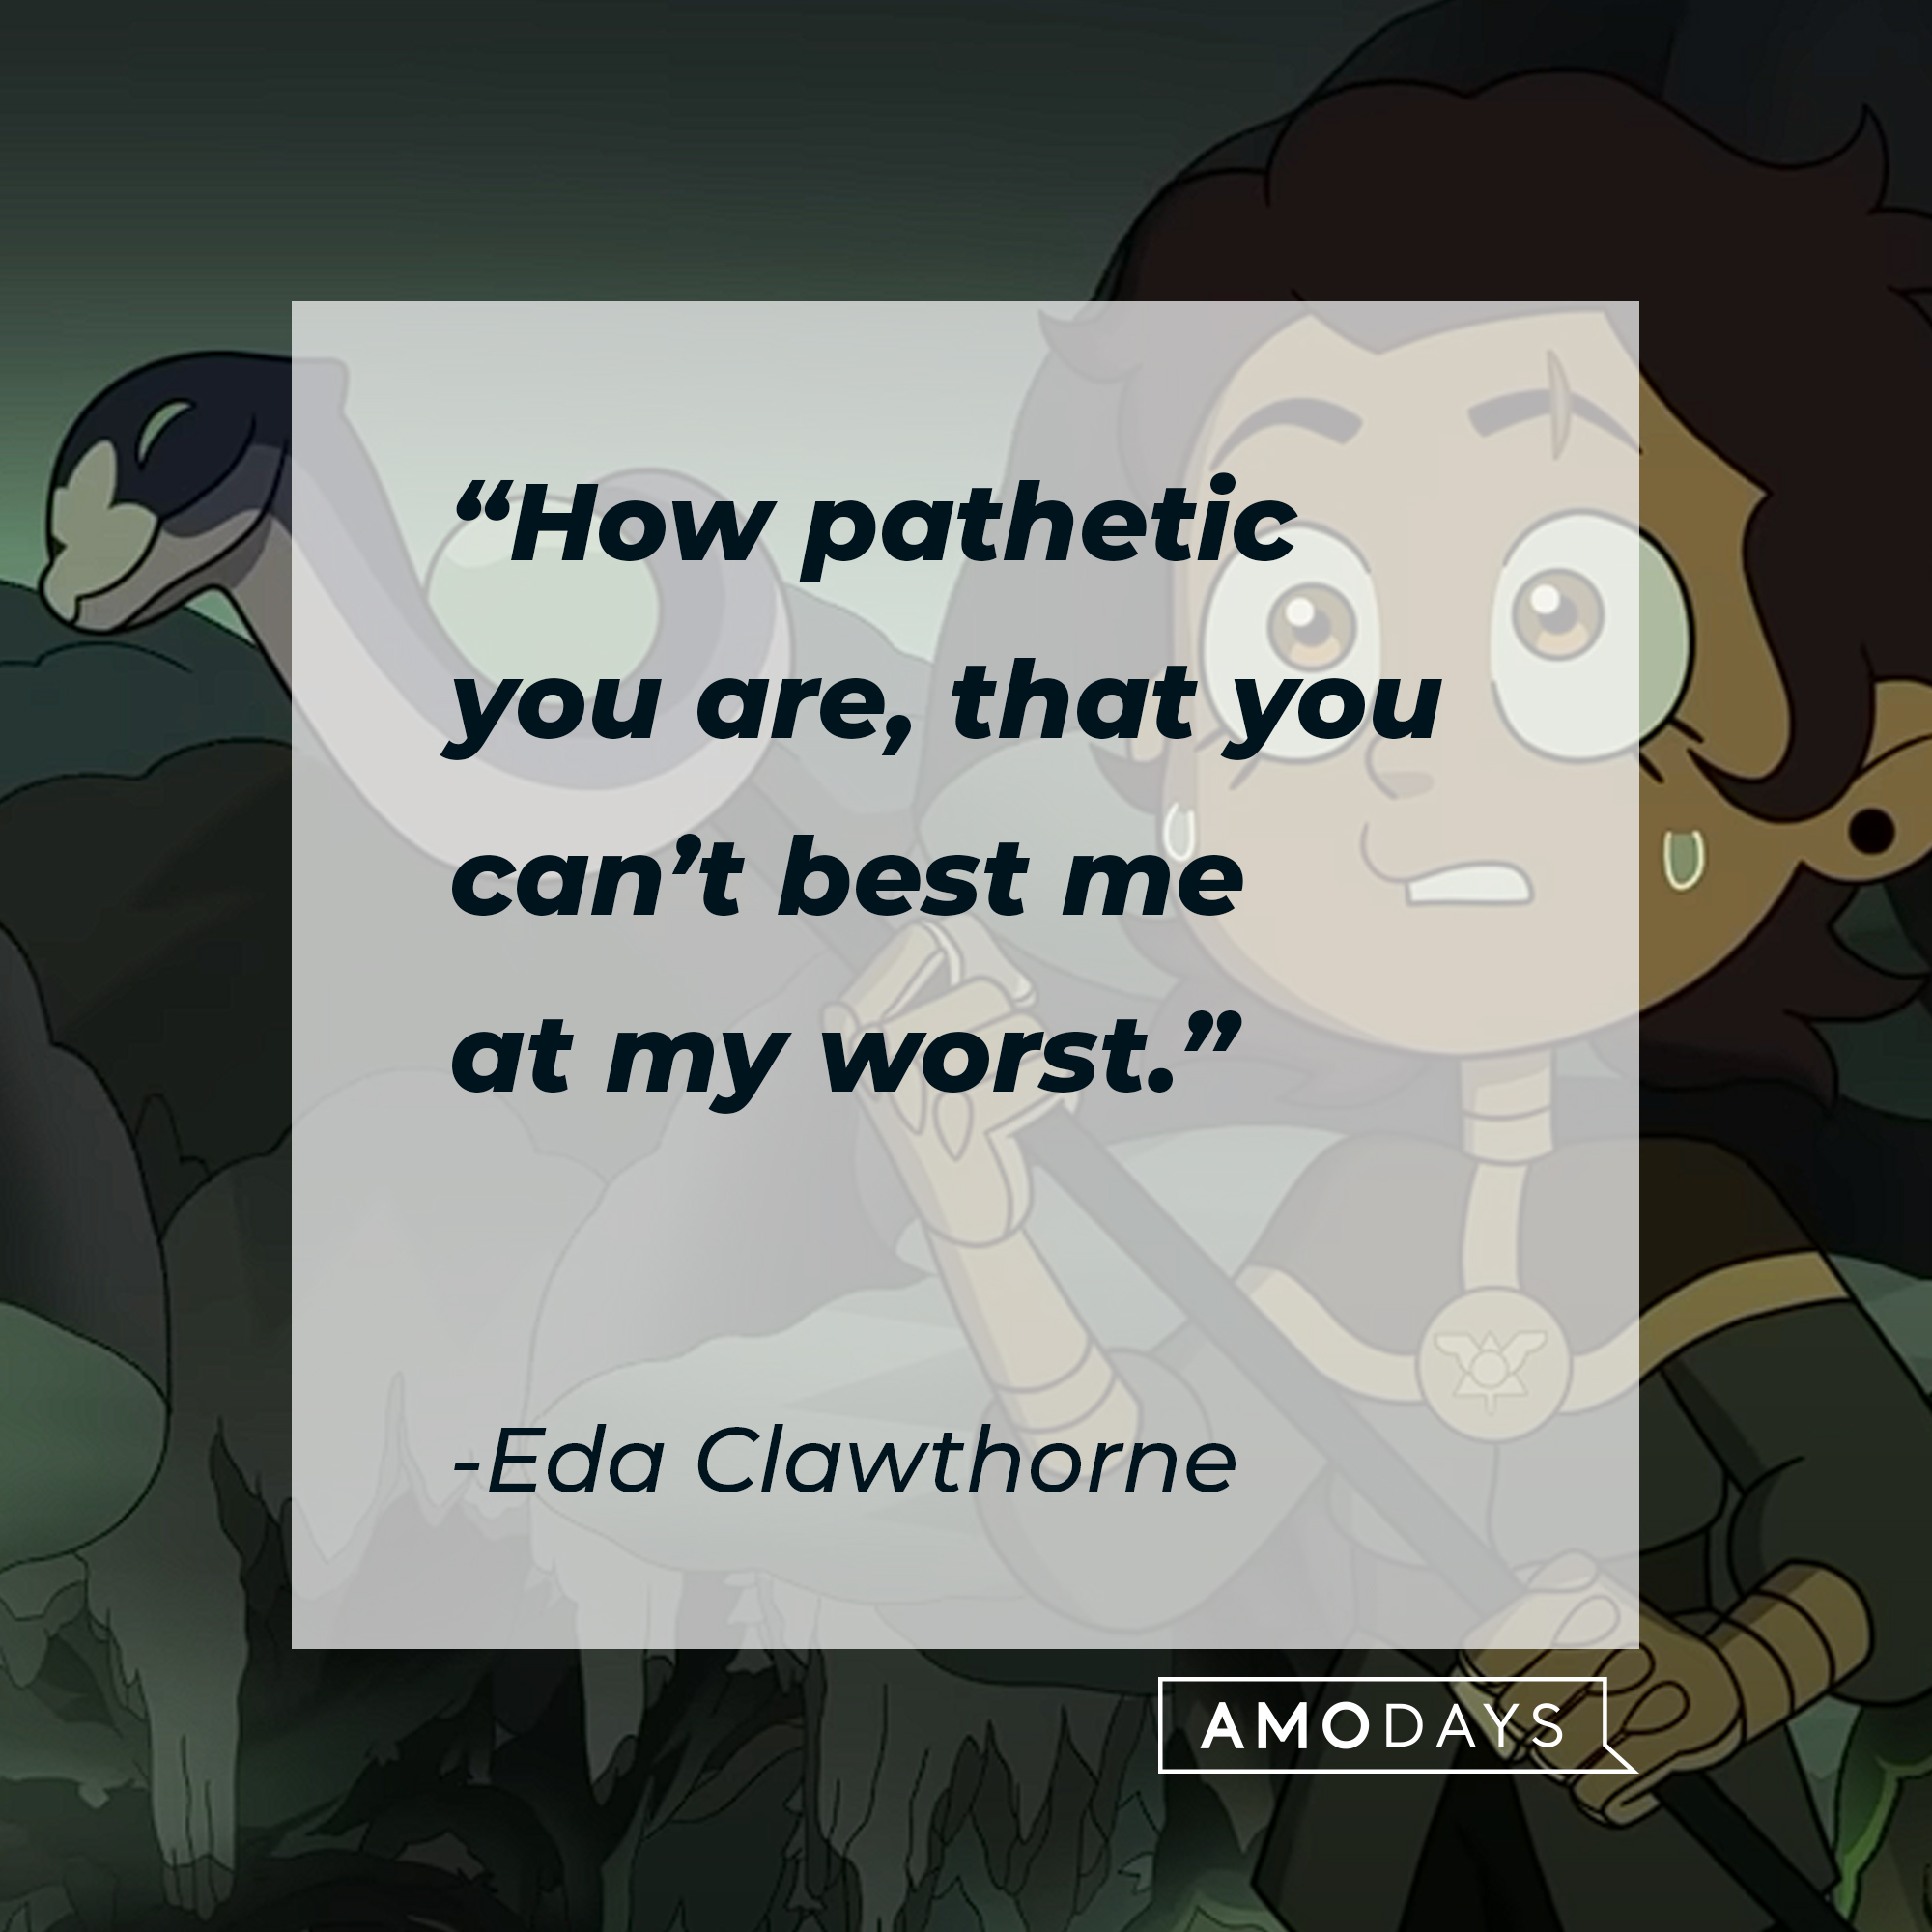 Eda Clawthorne's quote: “How pathetic you are, that you can’t best me at my worst.” | Source: youtube.com/disneychannel